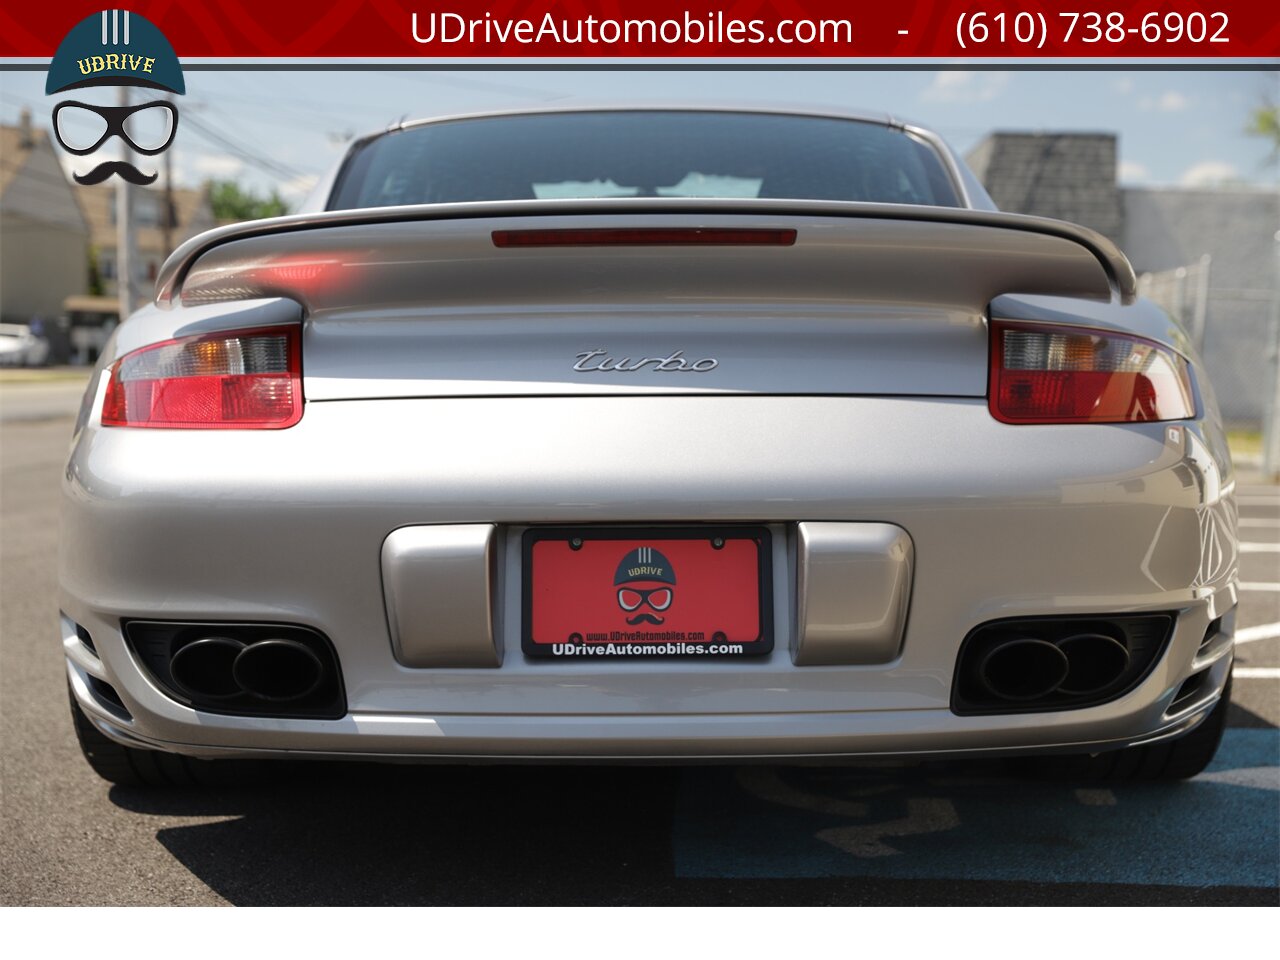 2008 Porsche 911 6 Speed Manual Turbo 997 PCCB's $149k MSRP   - Photo 20 - West Chester, PA 19382